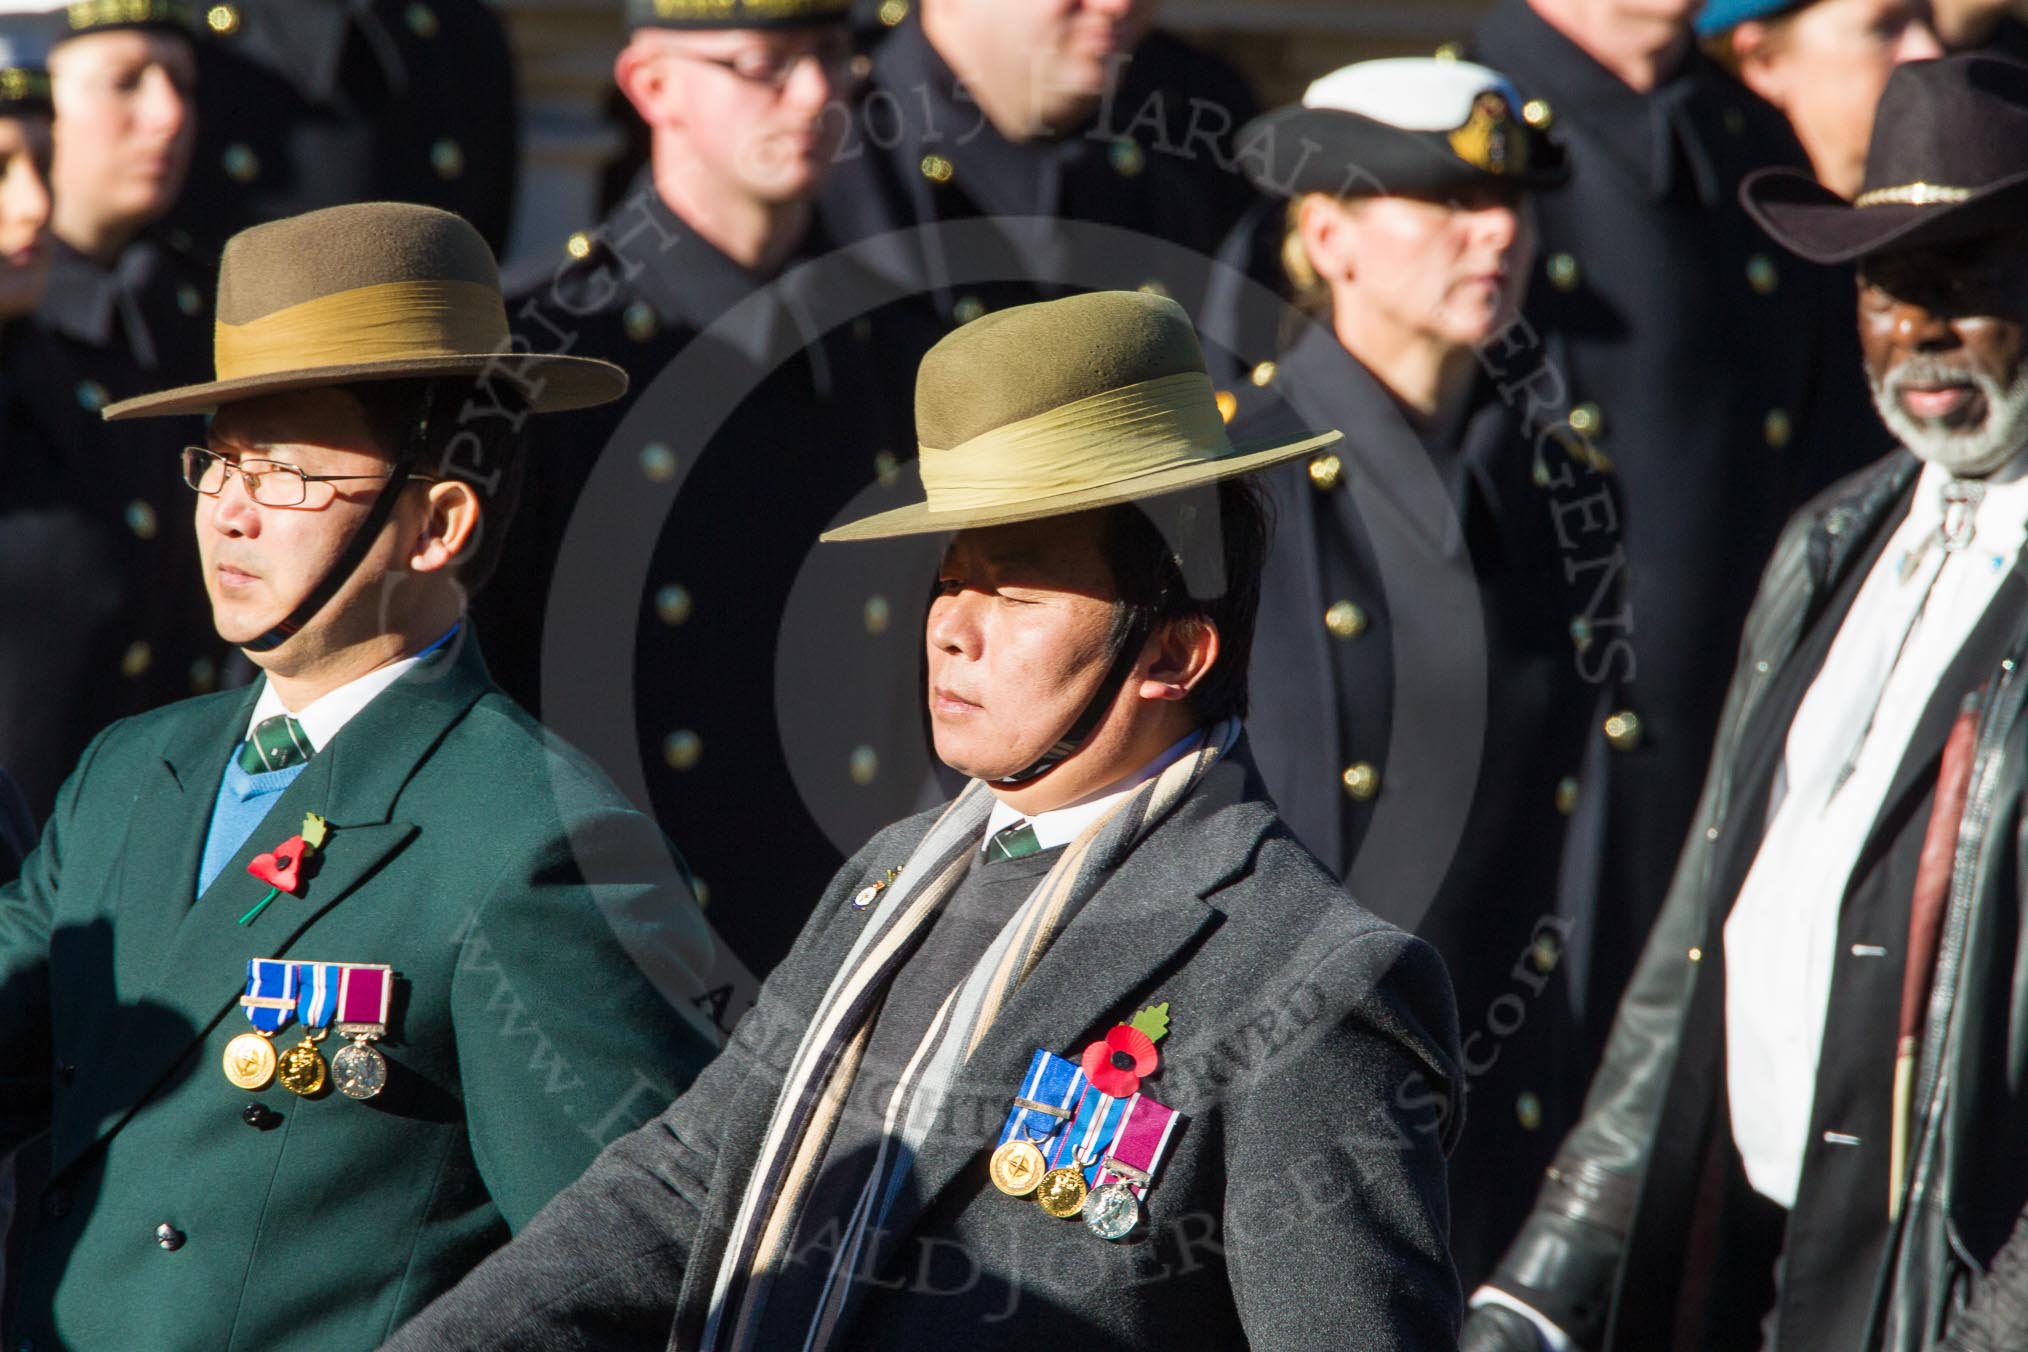 Remembrance Sunday Cenotaph March Past 2013: D2 - British Gurkha Welfare Association..
Press stand opposite the Foreign Office building, Whitehall, London SW1,
London,
Greater London,
United Kingdom,
on 10 November 2013 at 11:39, image #45